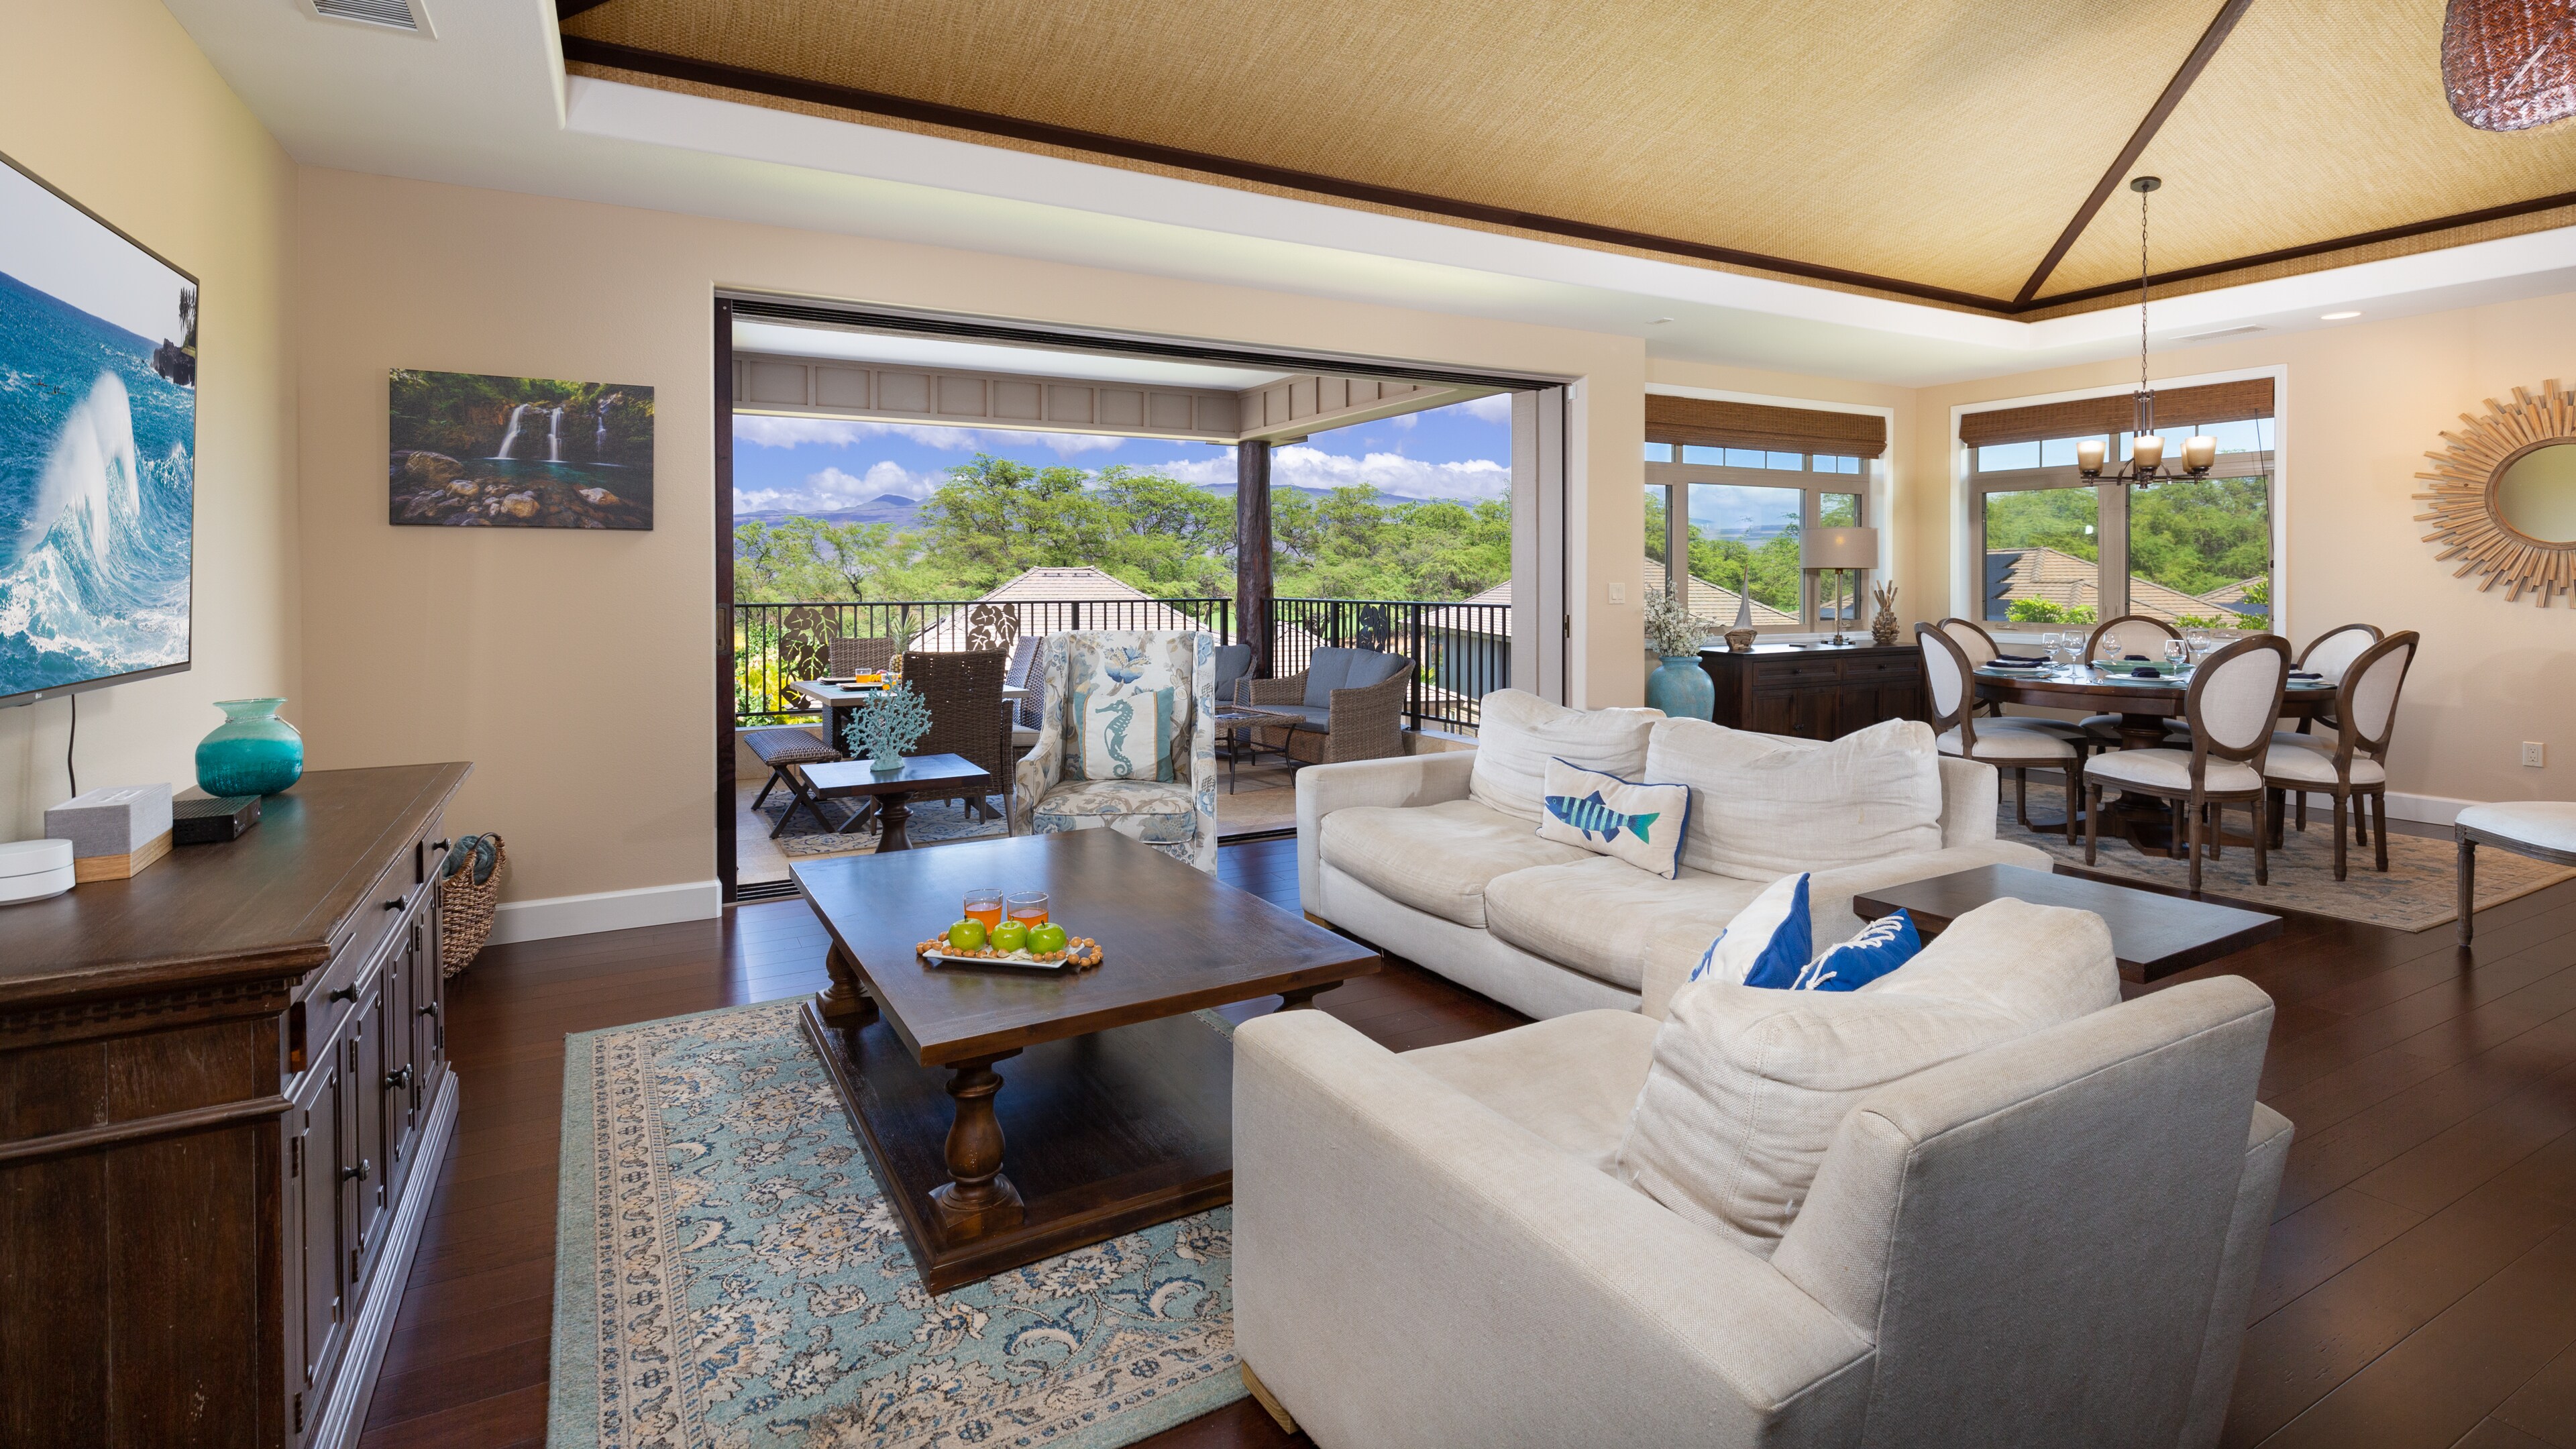 Welcome to "Once Upon a Tide" - 4BR home in desirable KaMilo at Mauna Lani